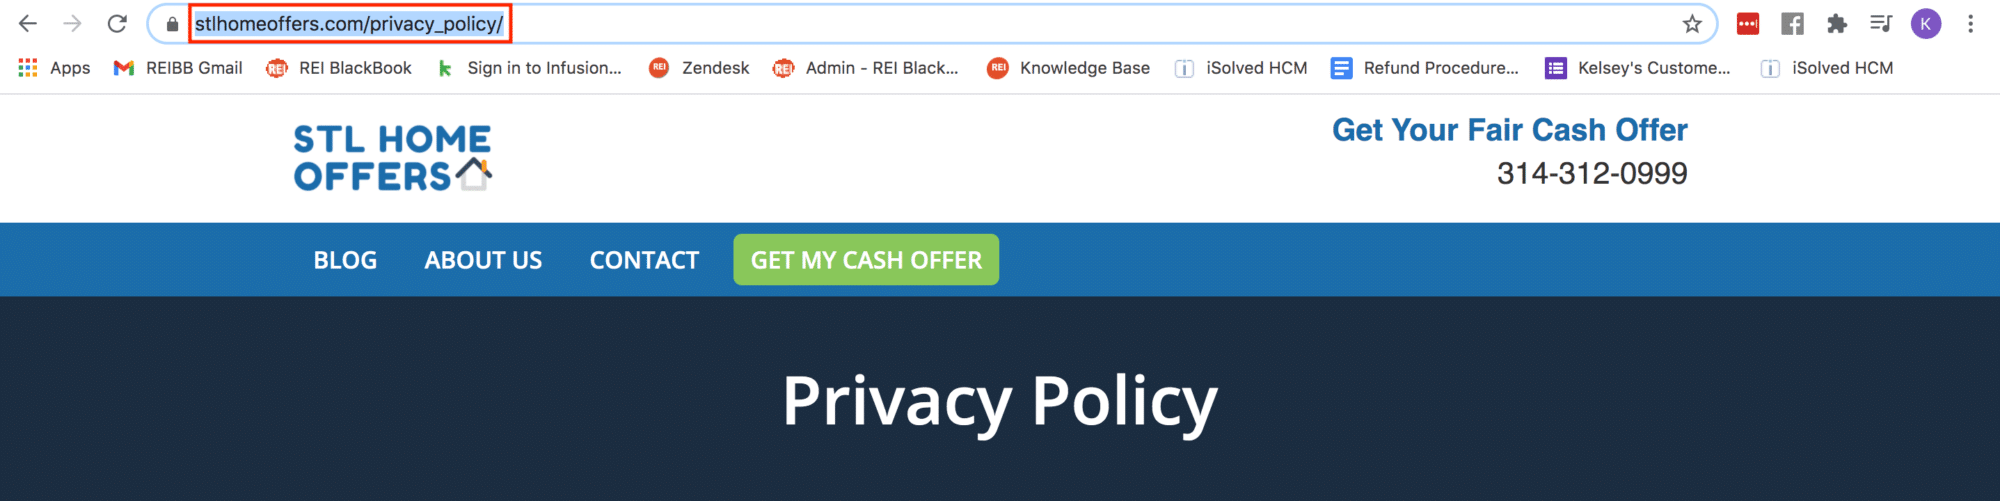 URL of the privacy policy on a website. 